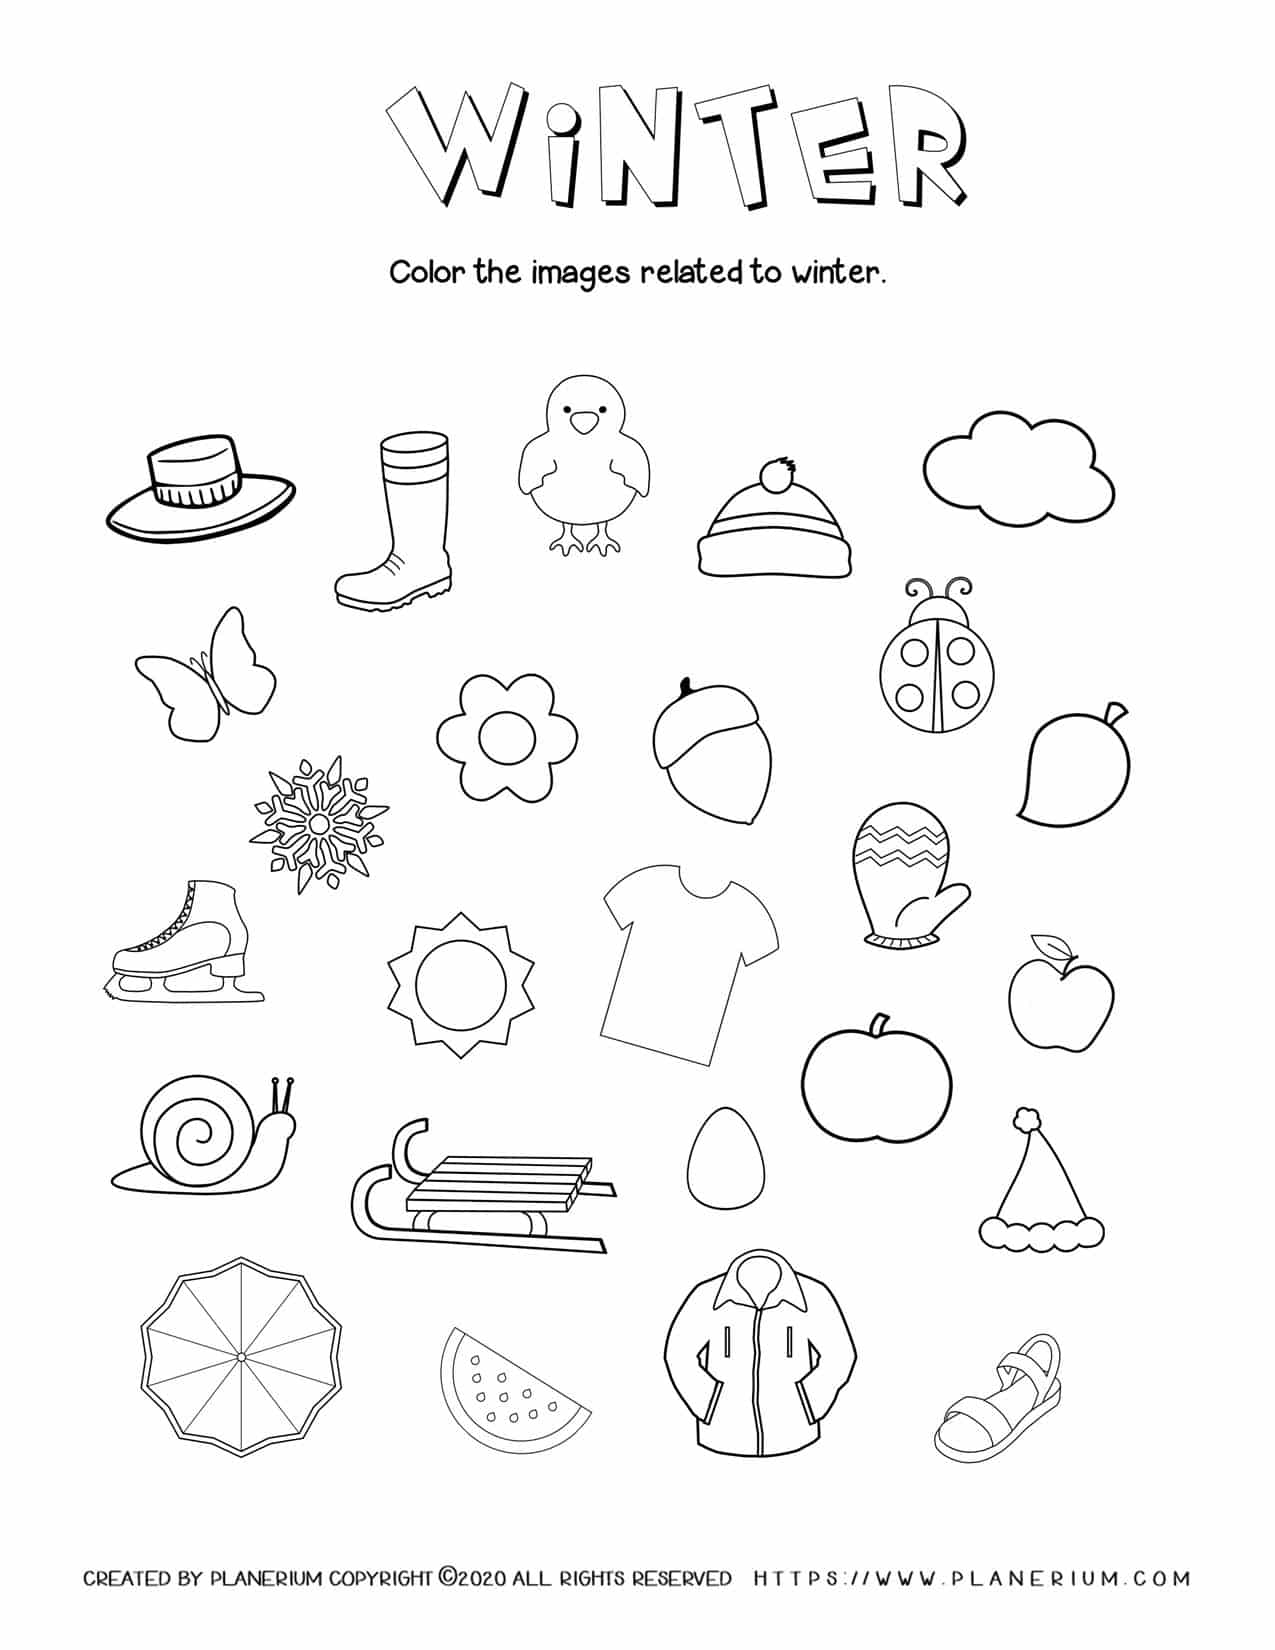 Winter Worksheet Color Related Objects Free Printable Planerium